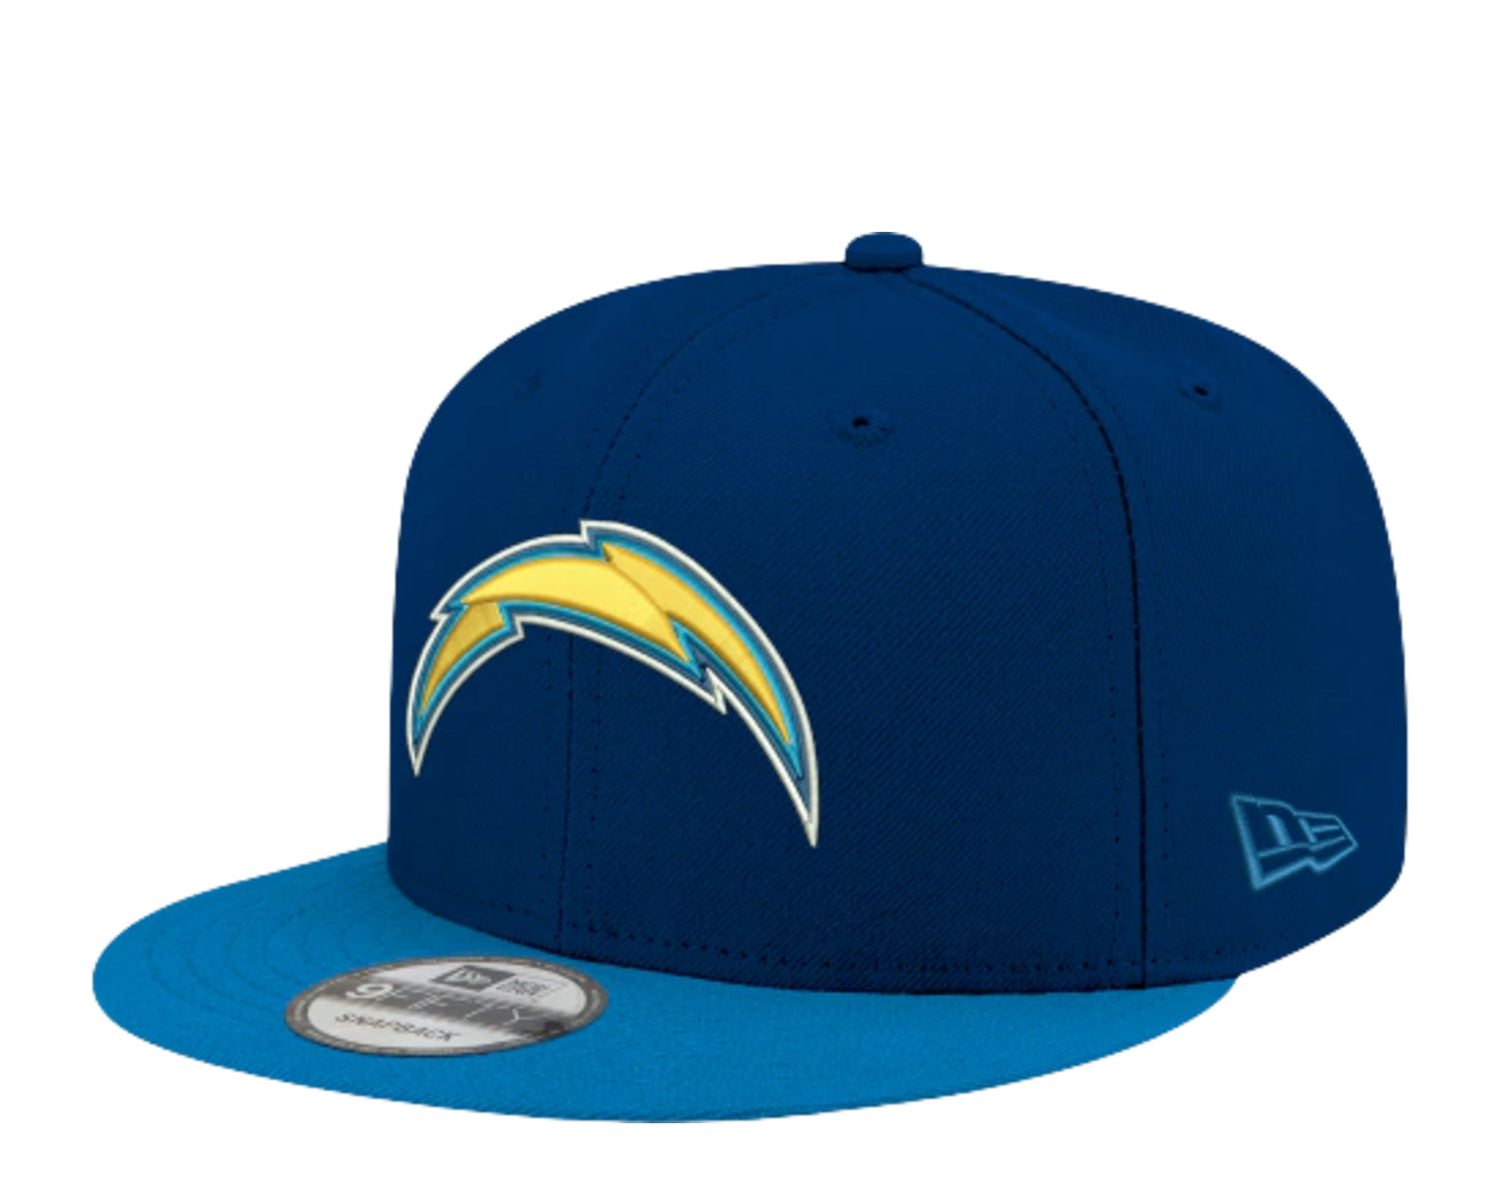 NFL - Los Angeles Chargers